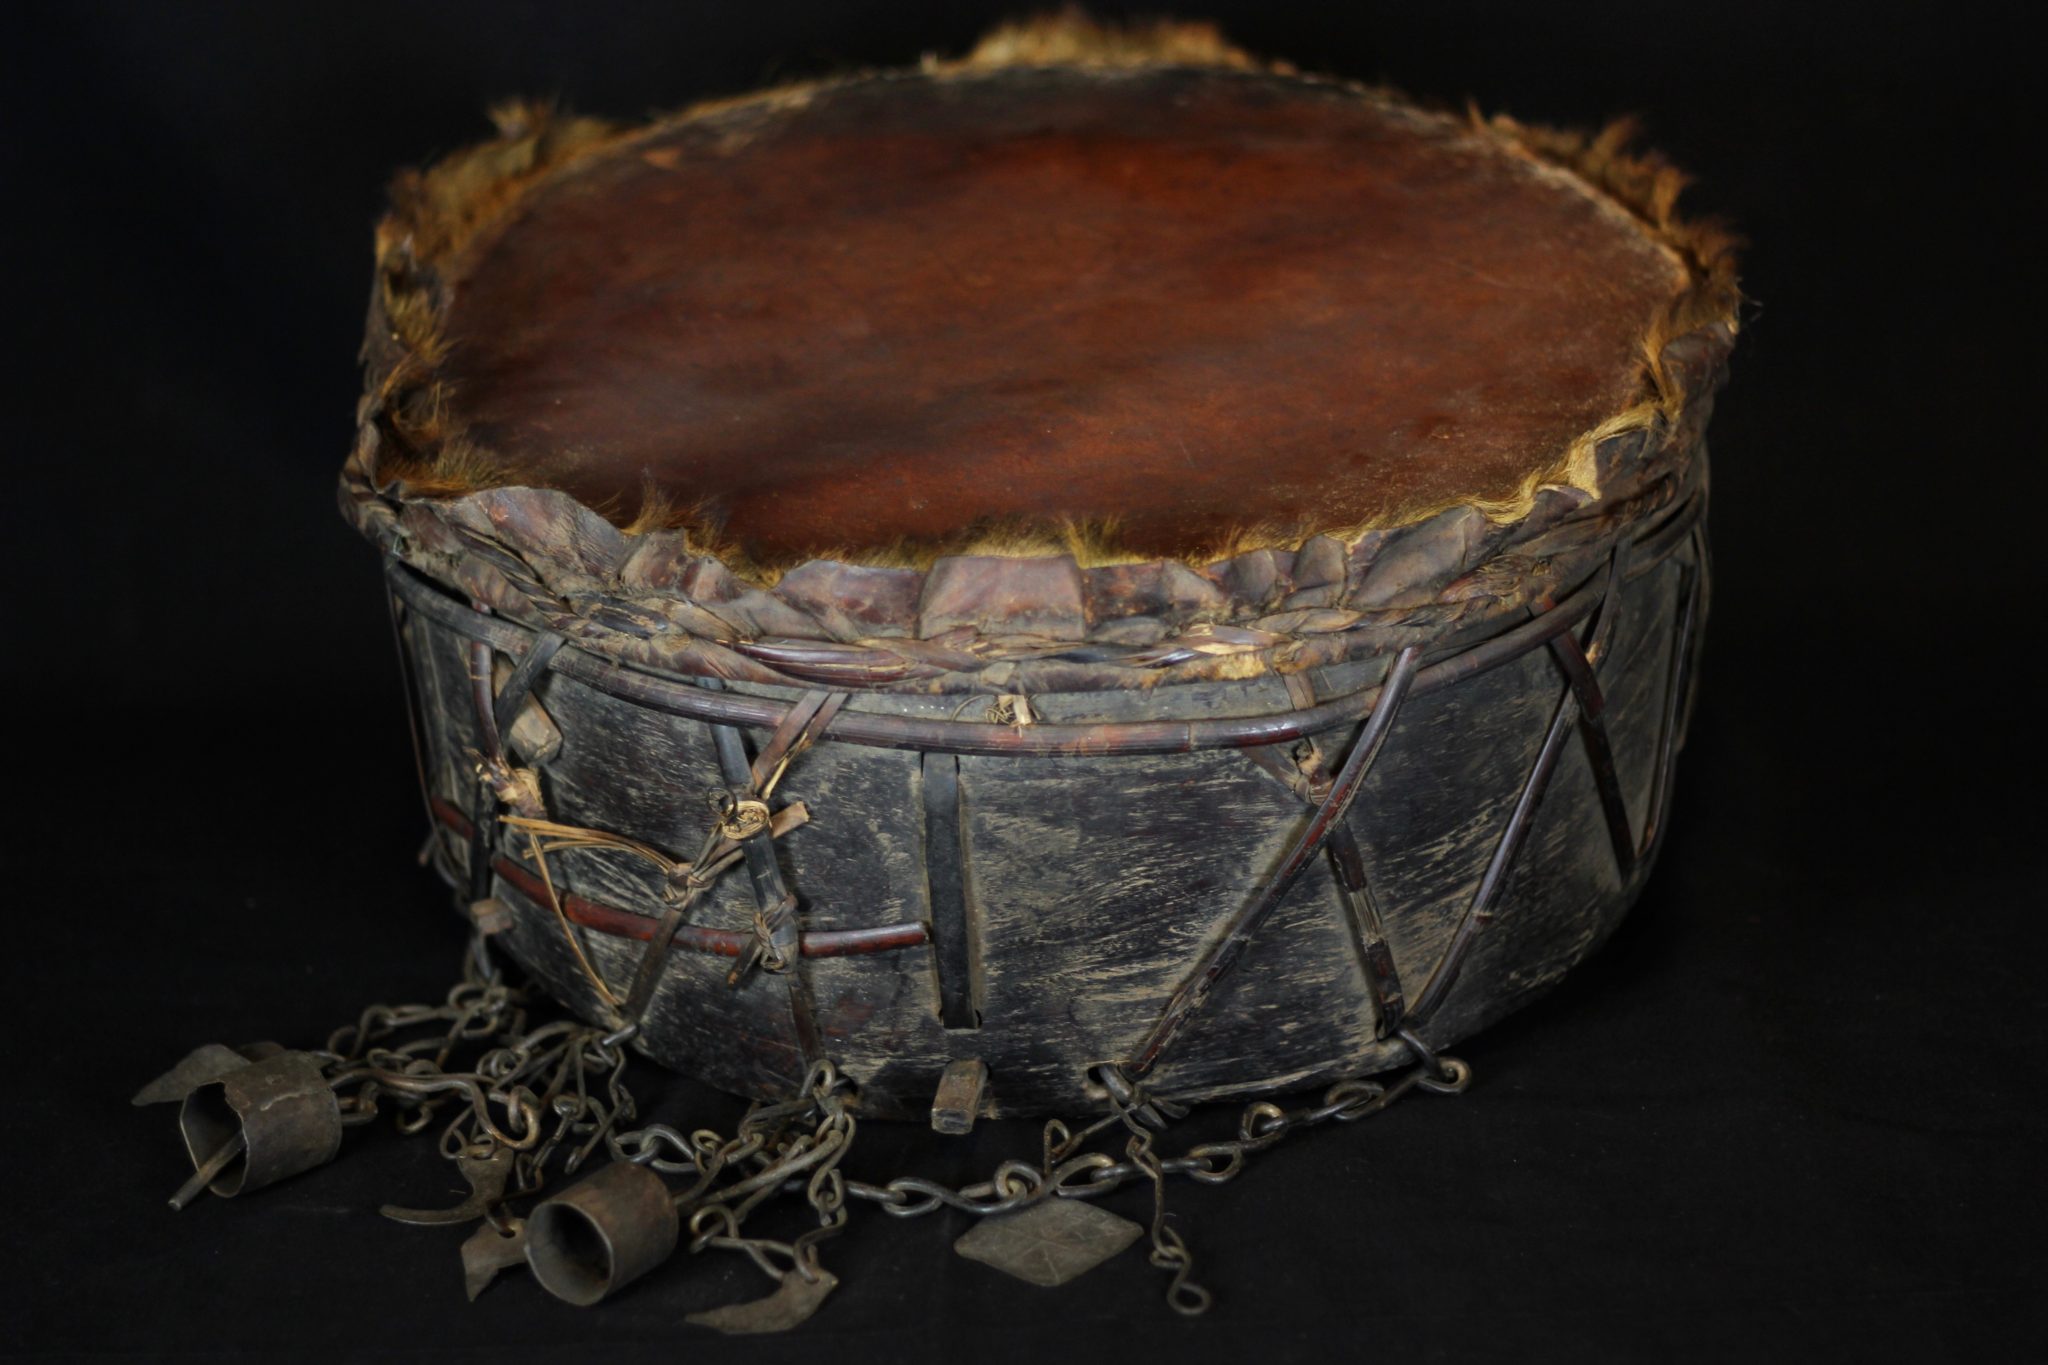 Sacred Ritual Drum, Nepal, Mid to late 19th c., Skin stretched over wood, iron, shaman bells and amulets, To facilitate entering and maintaining a trance state necessary for the shaman to perform rituals 17 ½” x 8” x 8” (plus 7” bell chains), $1400.